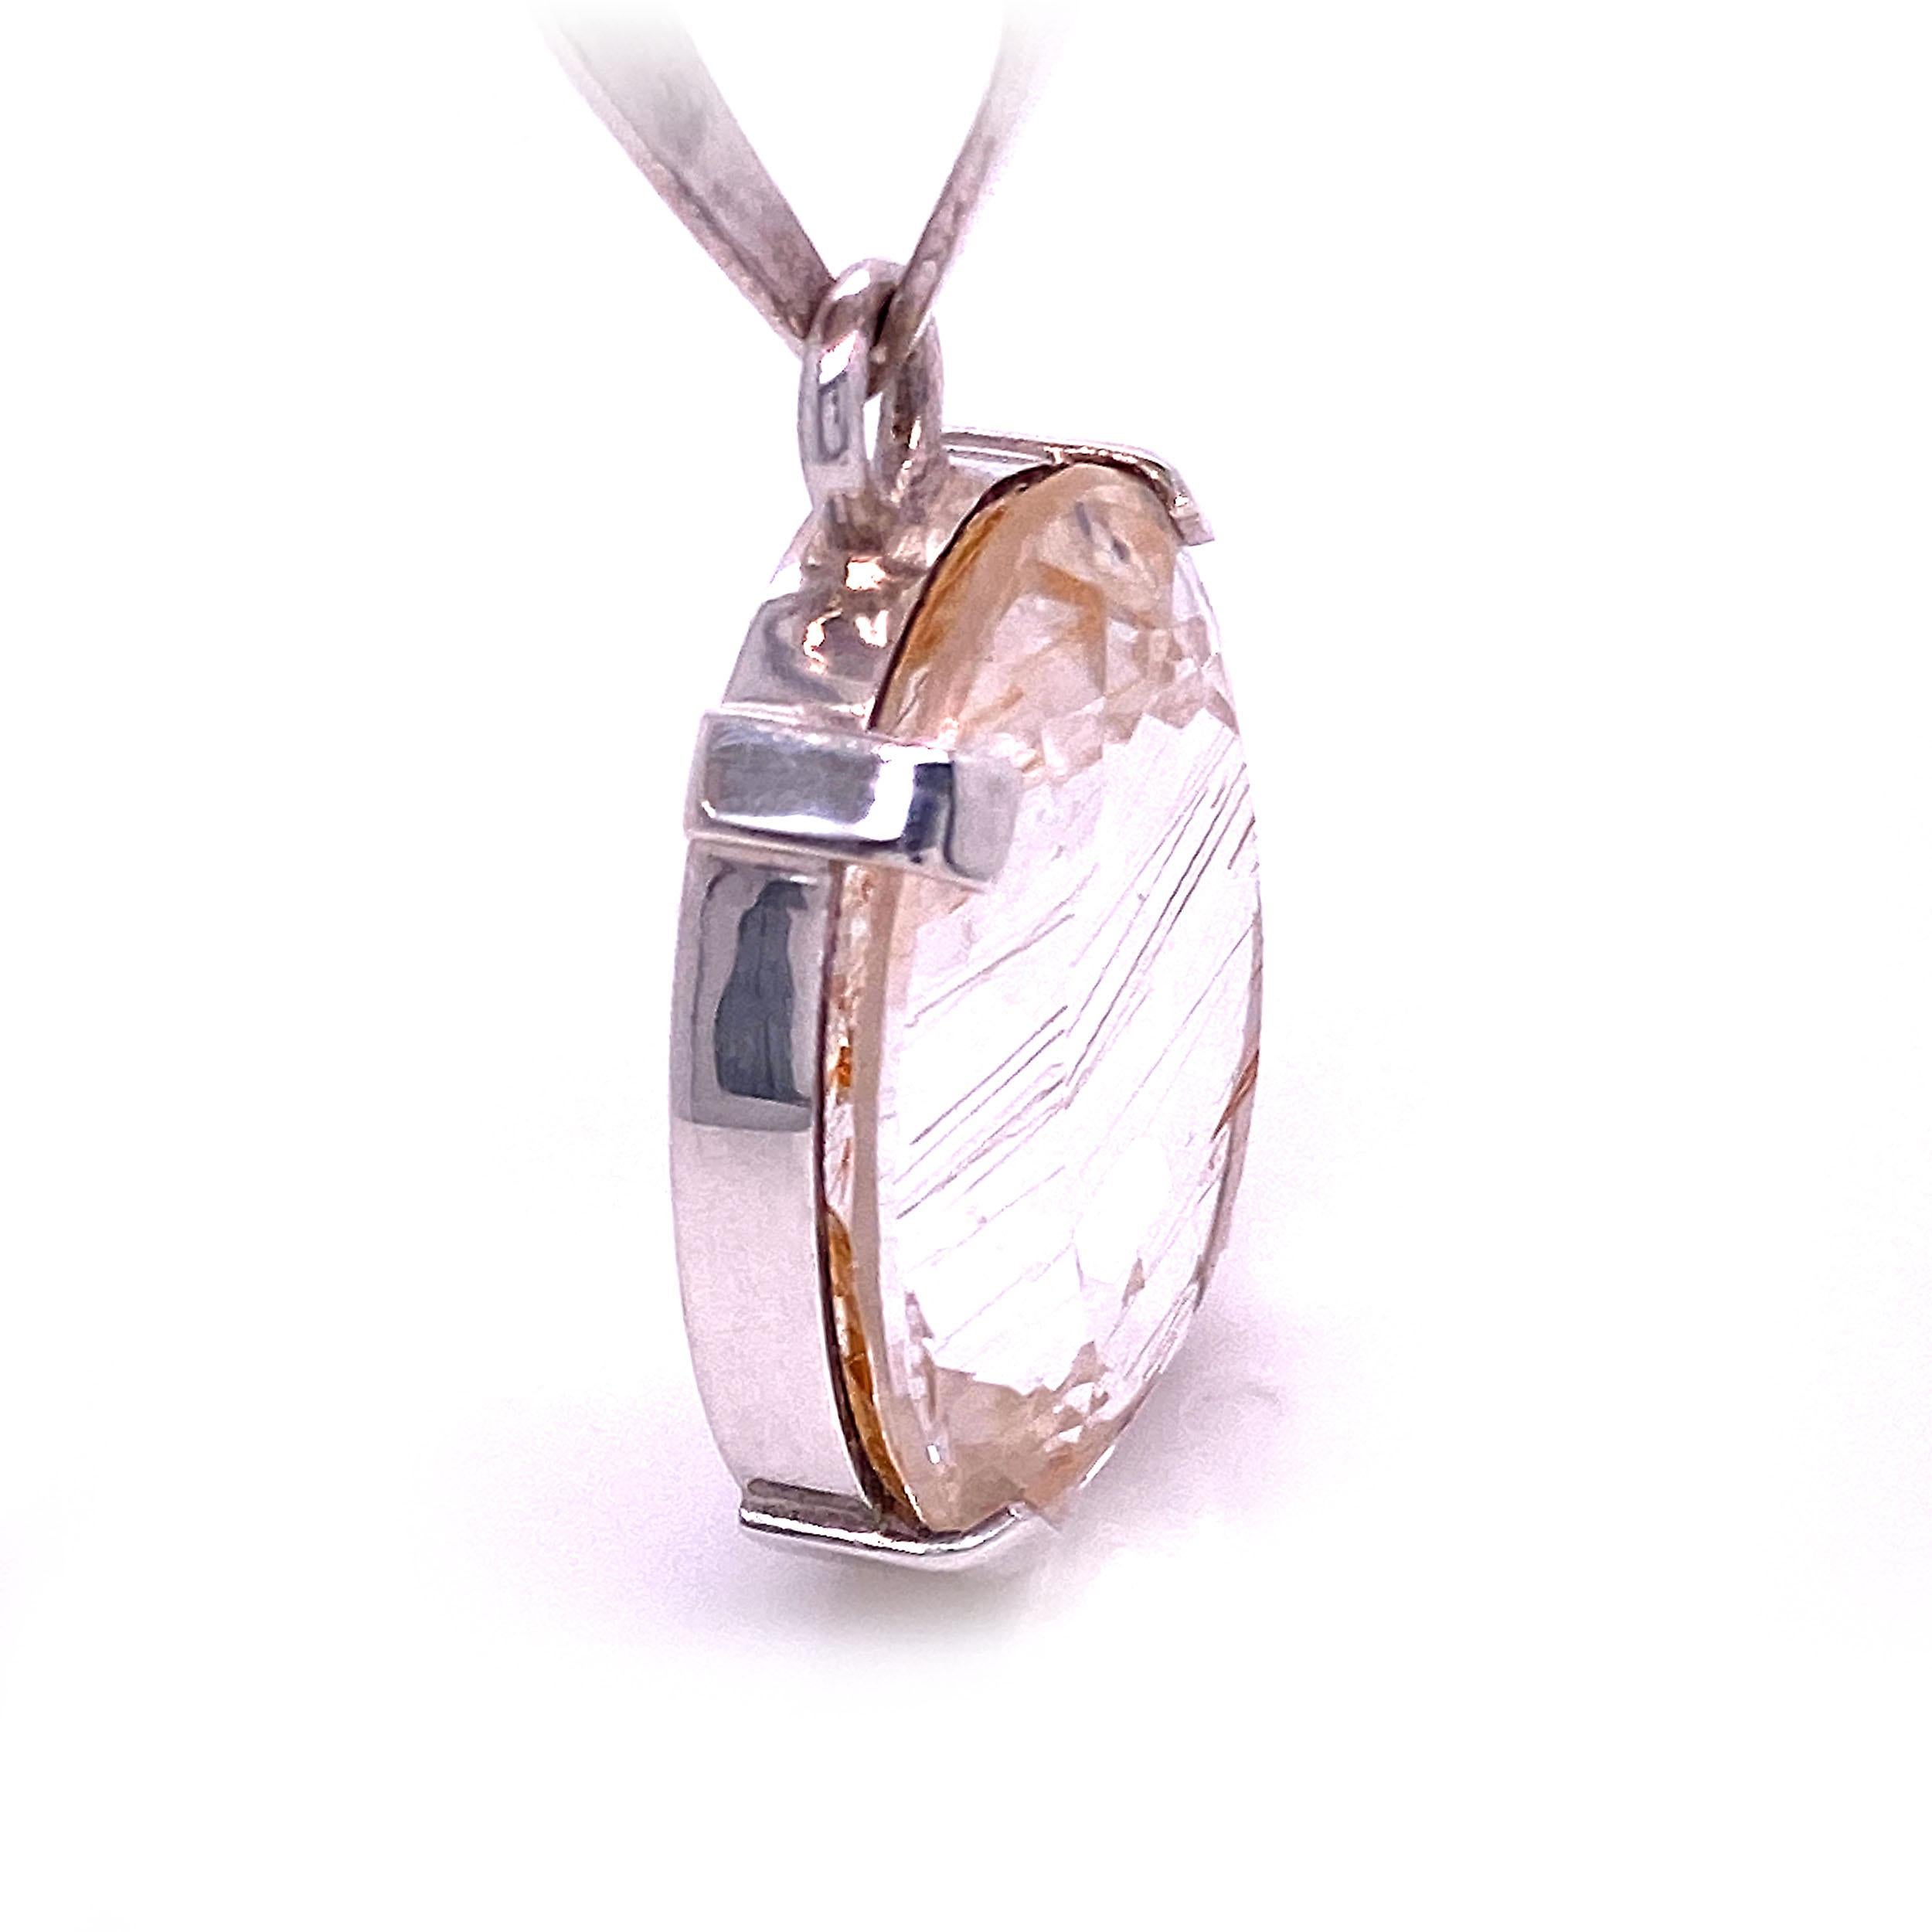 This Gemjunky pendant is a sparkly oval faceted Brazilian Quartz with striking lines of Rutile running through it. This bright oval is a generous 21 x 18 mm.  The one of a kind  pendant is a total of 37 mm in length. It was created in our studio in